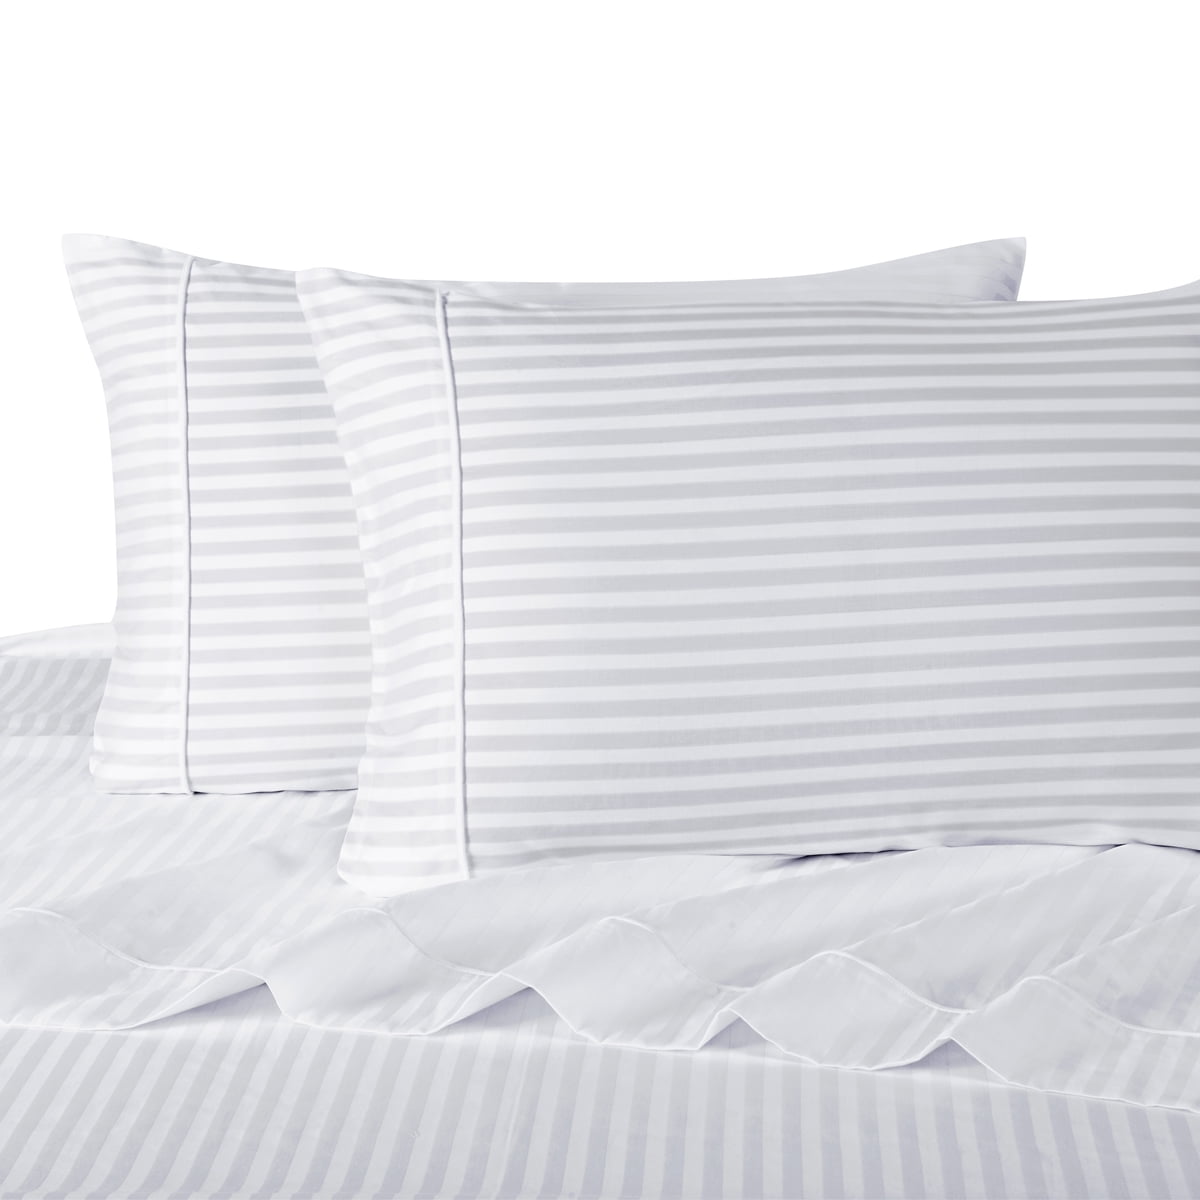 Details about   EMONIA 400-Thread-Count 100% Cotton Sheet White Queen-Sheets Set 4-Piece Long-S 